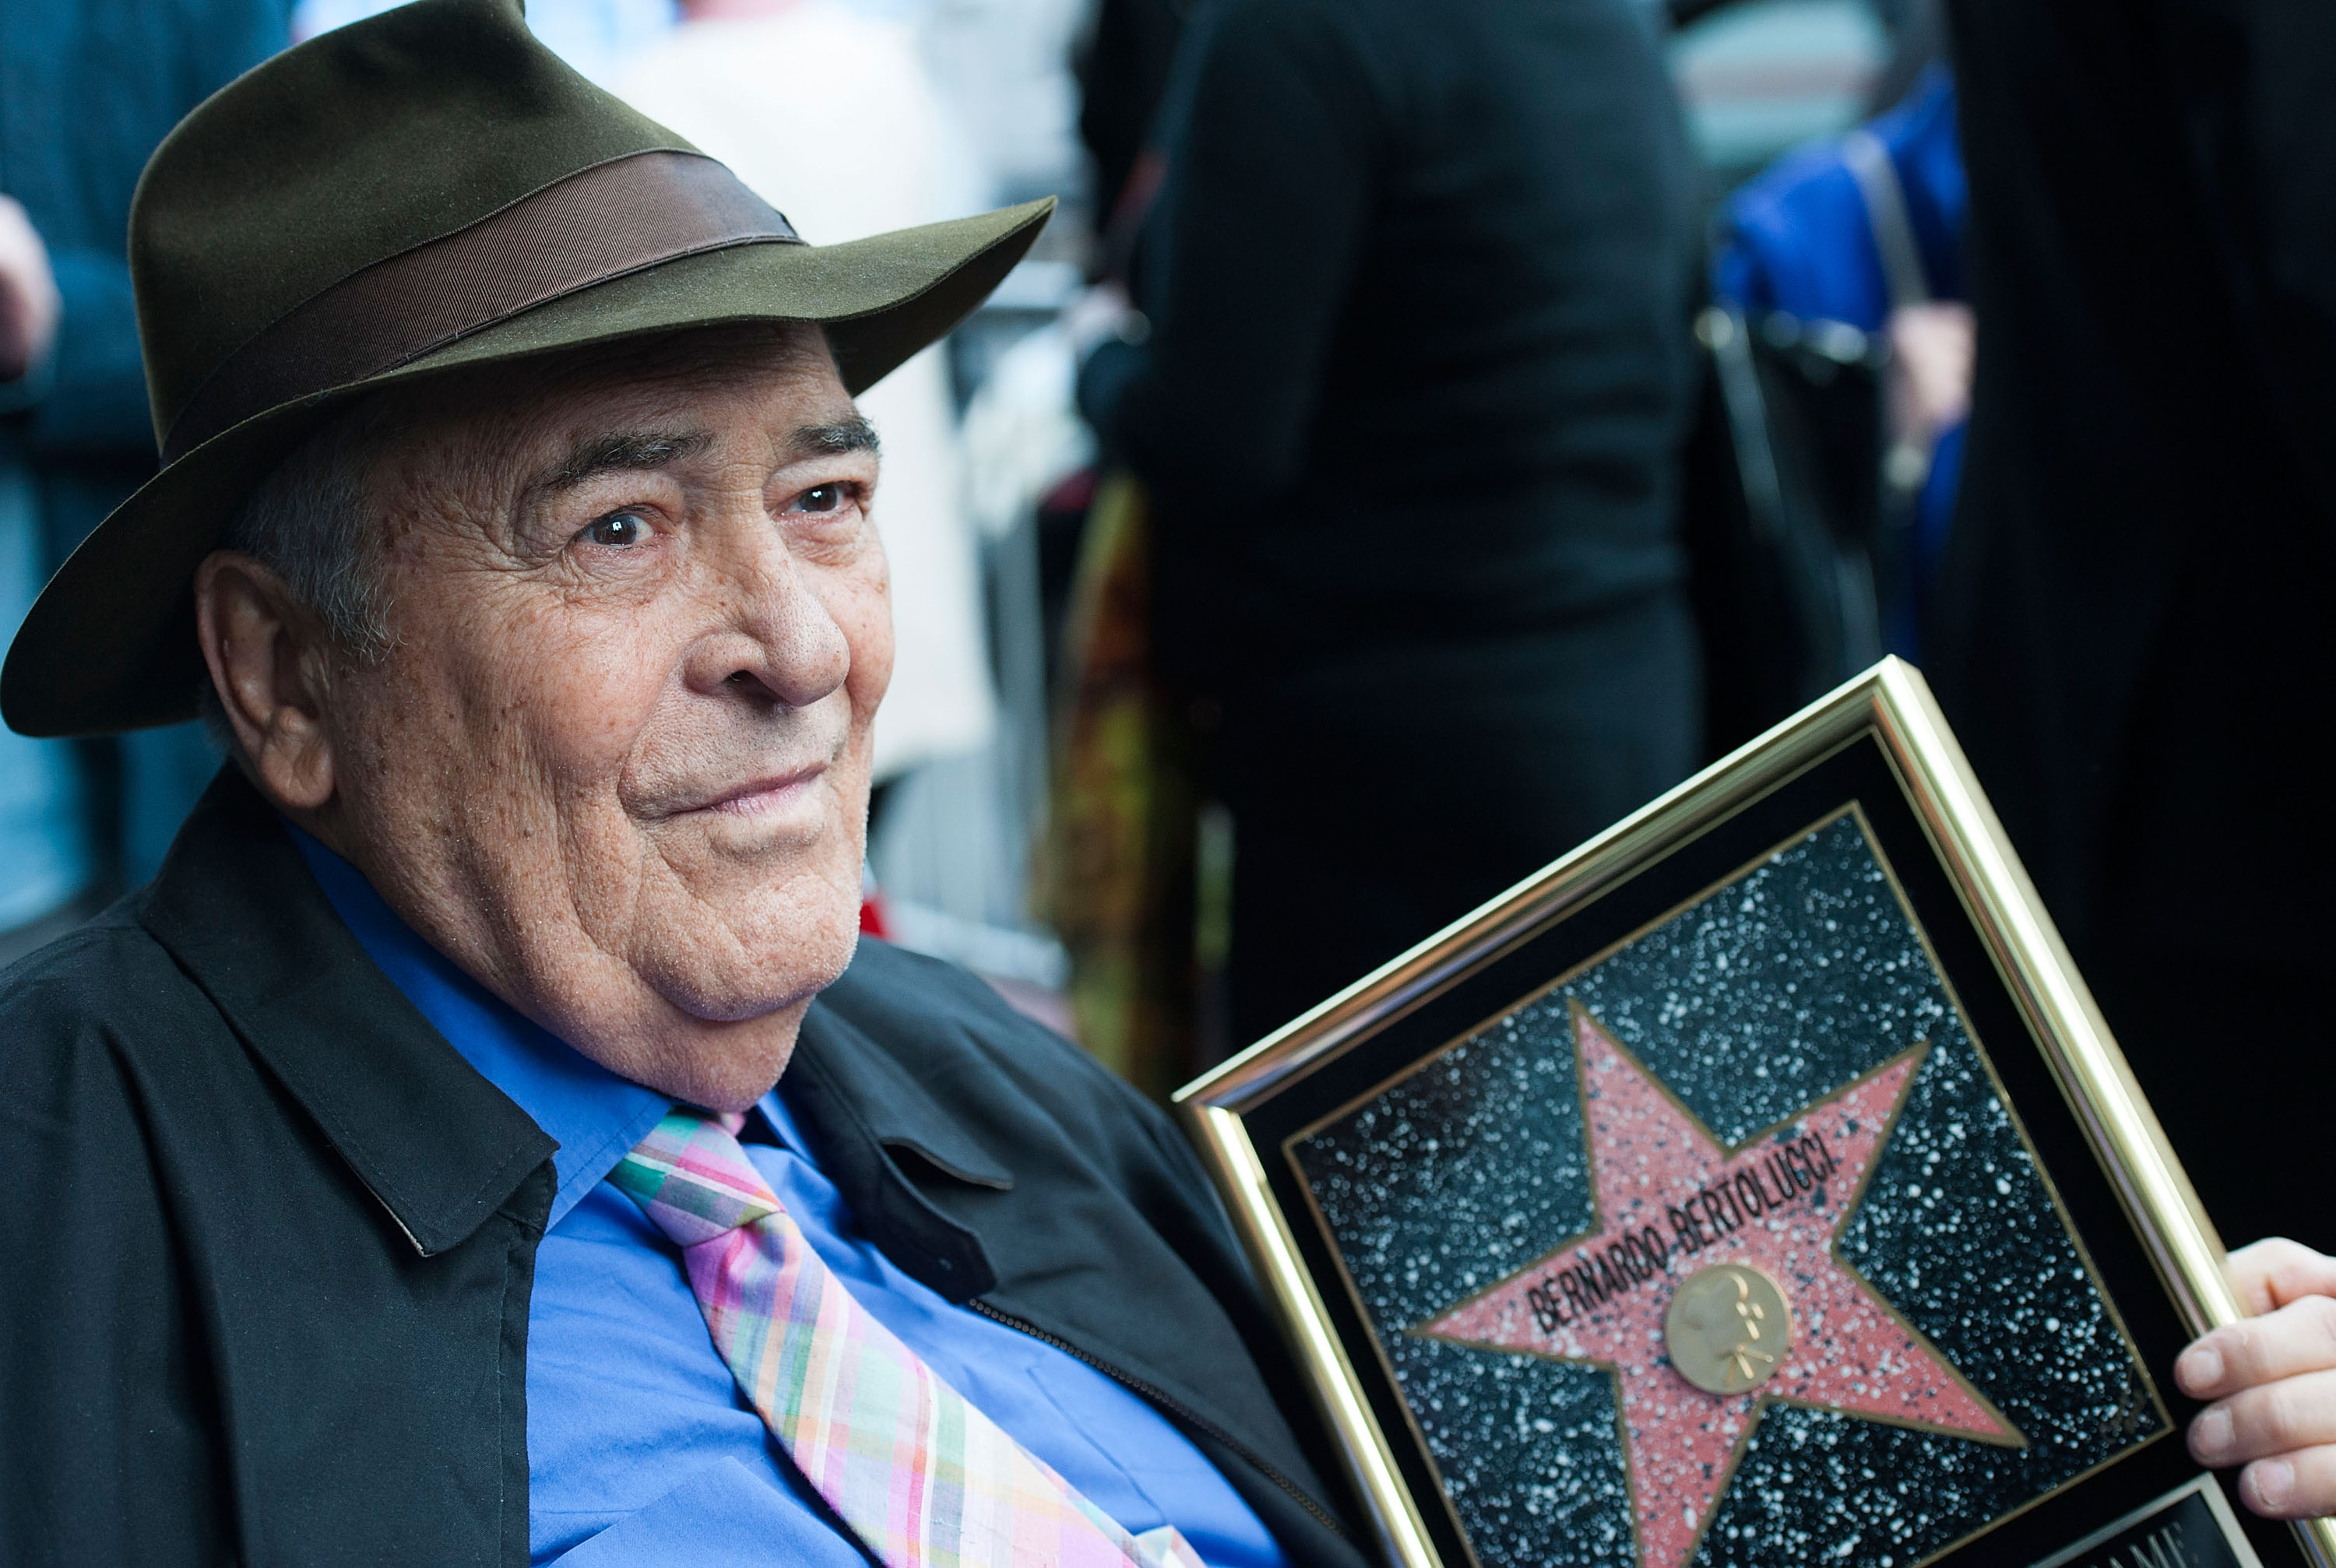 HOLLYWOOD, CA - NOVEMBER 19:  Director Bernardo Bertolucci celebrates his Star on the Hollywood Walk of Fame on November 19, 2013 in Hollywood, California.  (Photo by Valerie Macon/Getty Images)